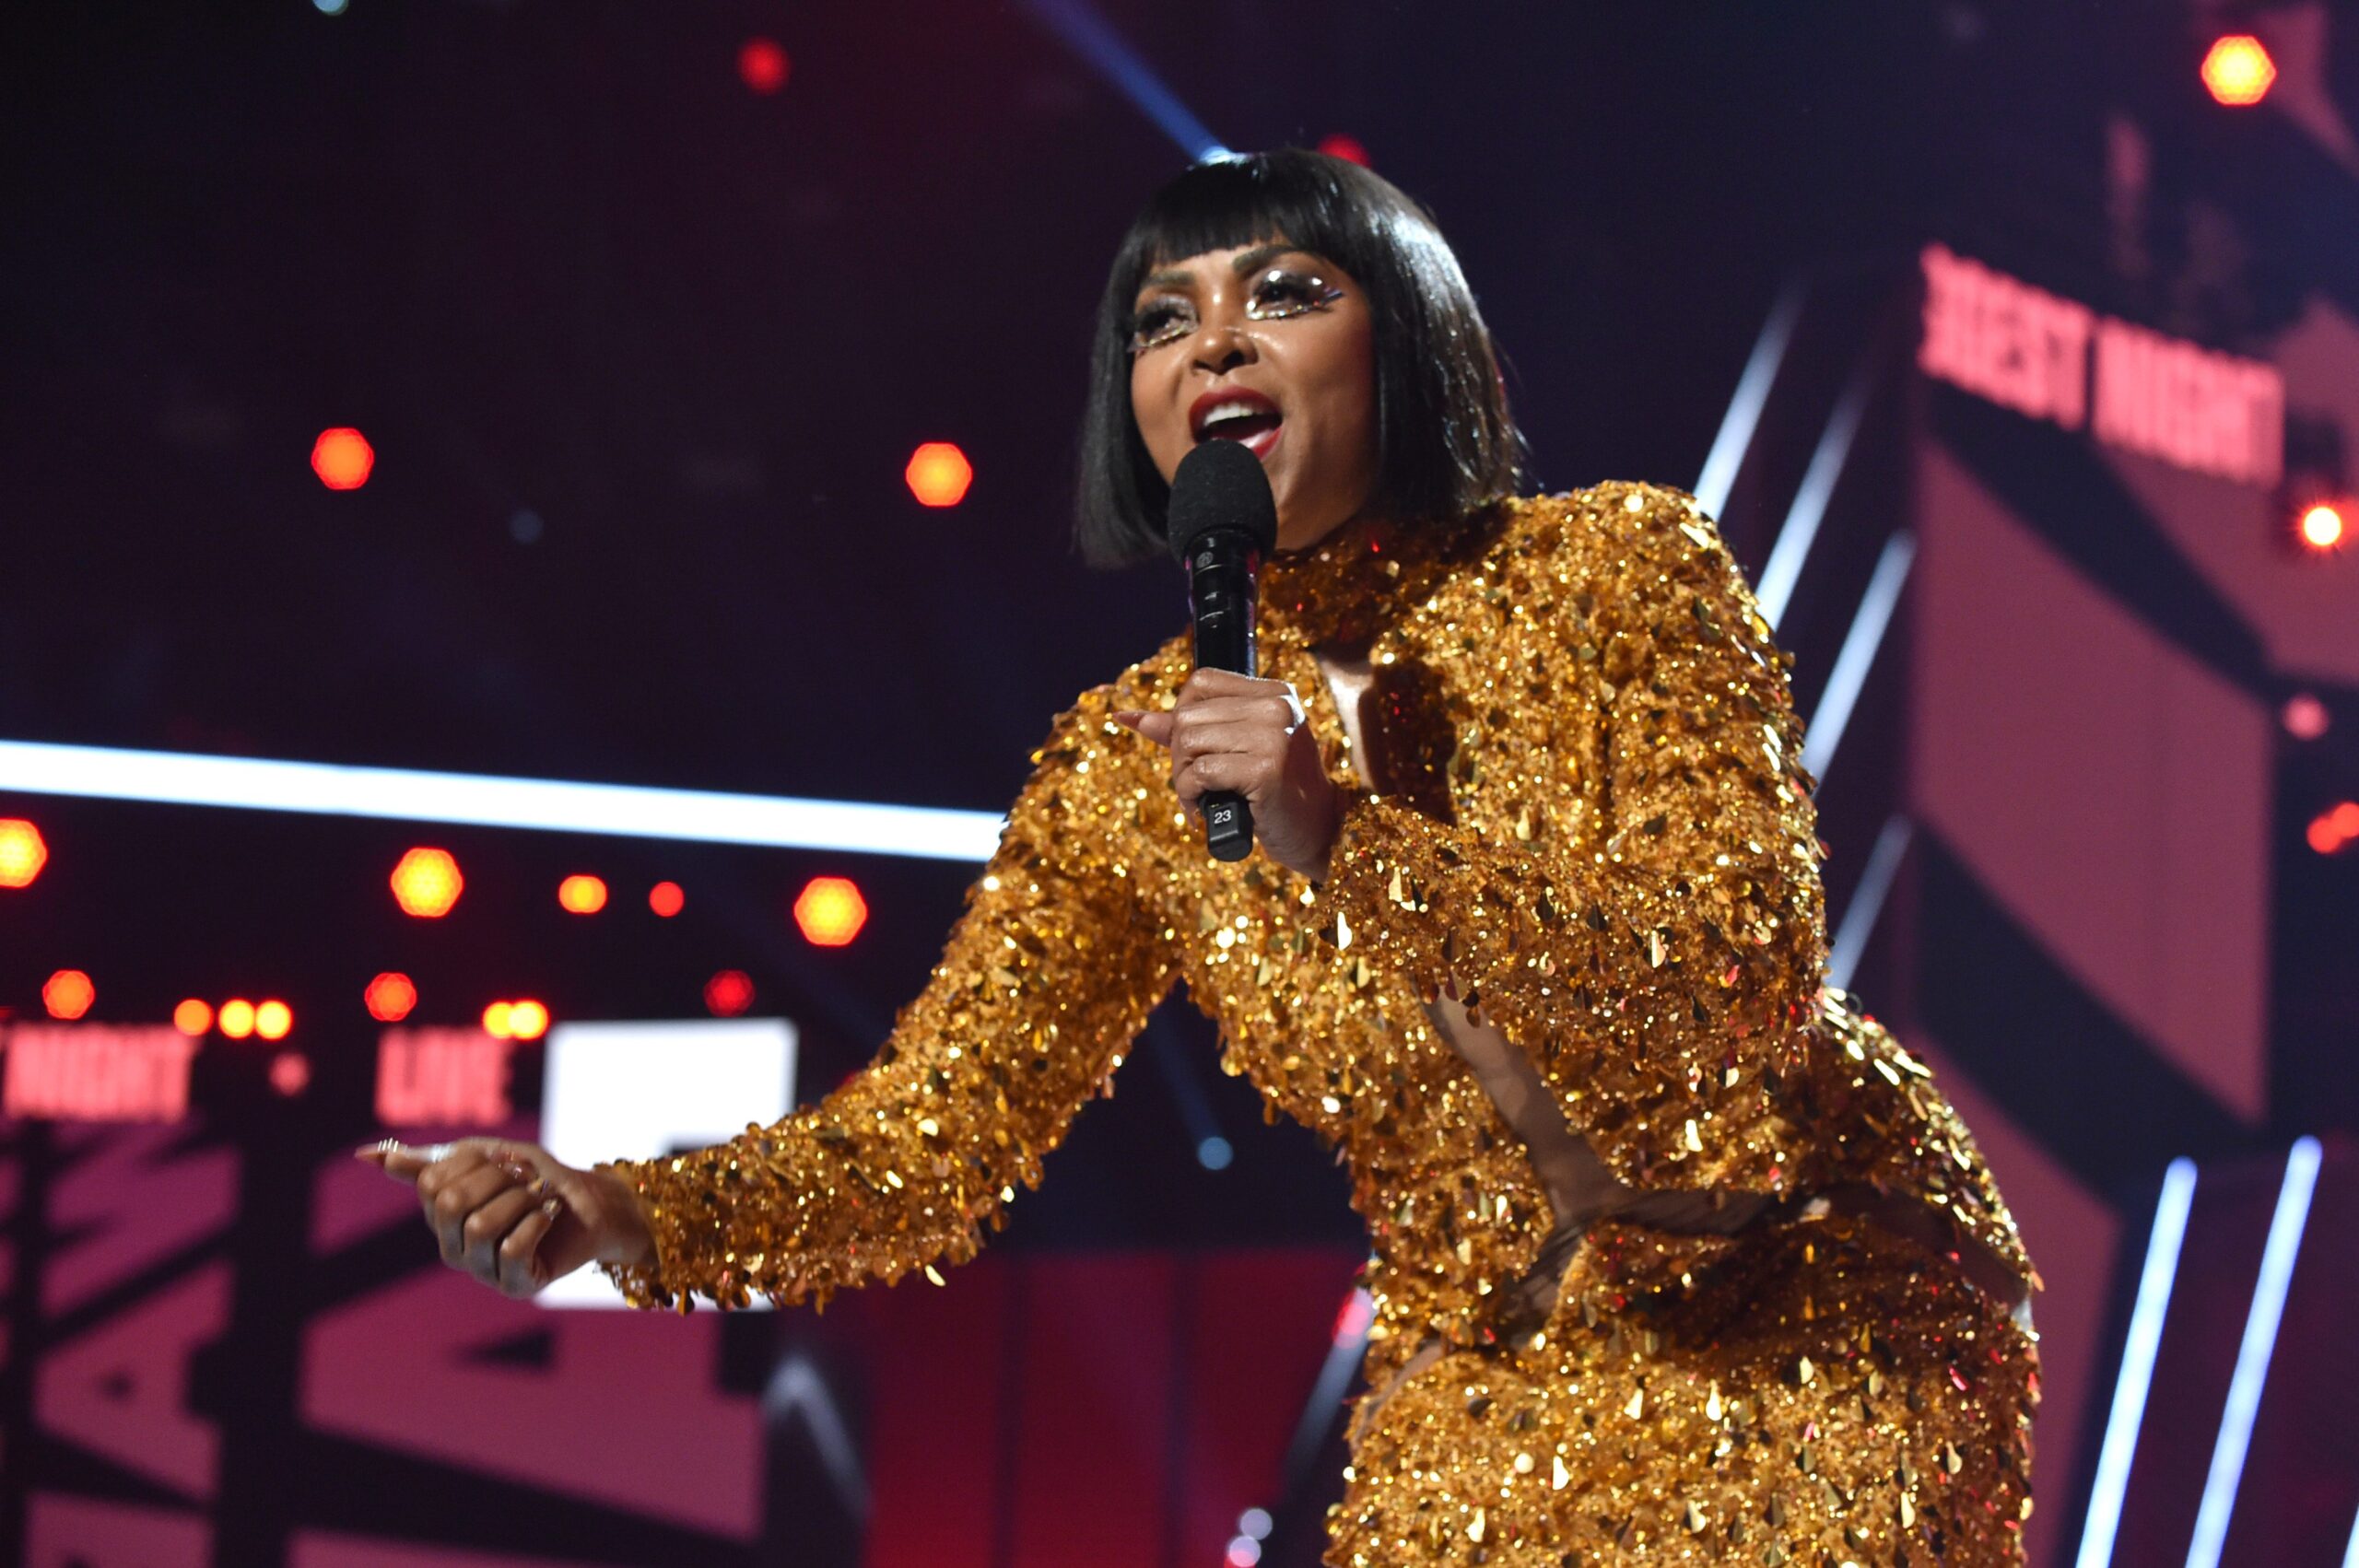 LOS ANGELES, CALIFORNIA - JUNE 26: Host Taraji P. Henson speaks onstage during the 2022 BET Awards at Microsoft Theater on June 26, 2022 in Los Angeles, California. (Photo by Aaron J. Thornton/Getty Images for BET)